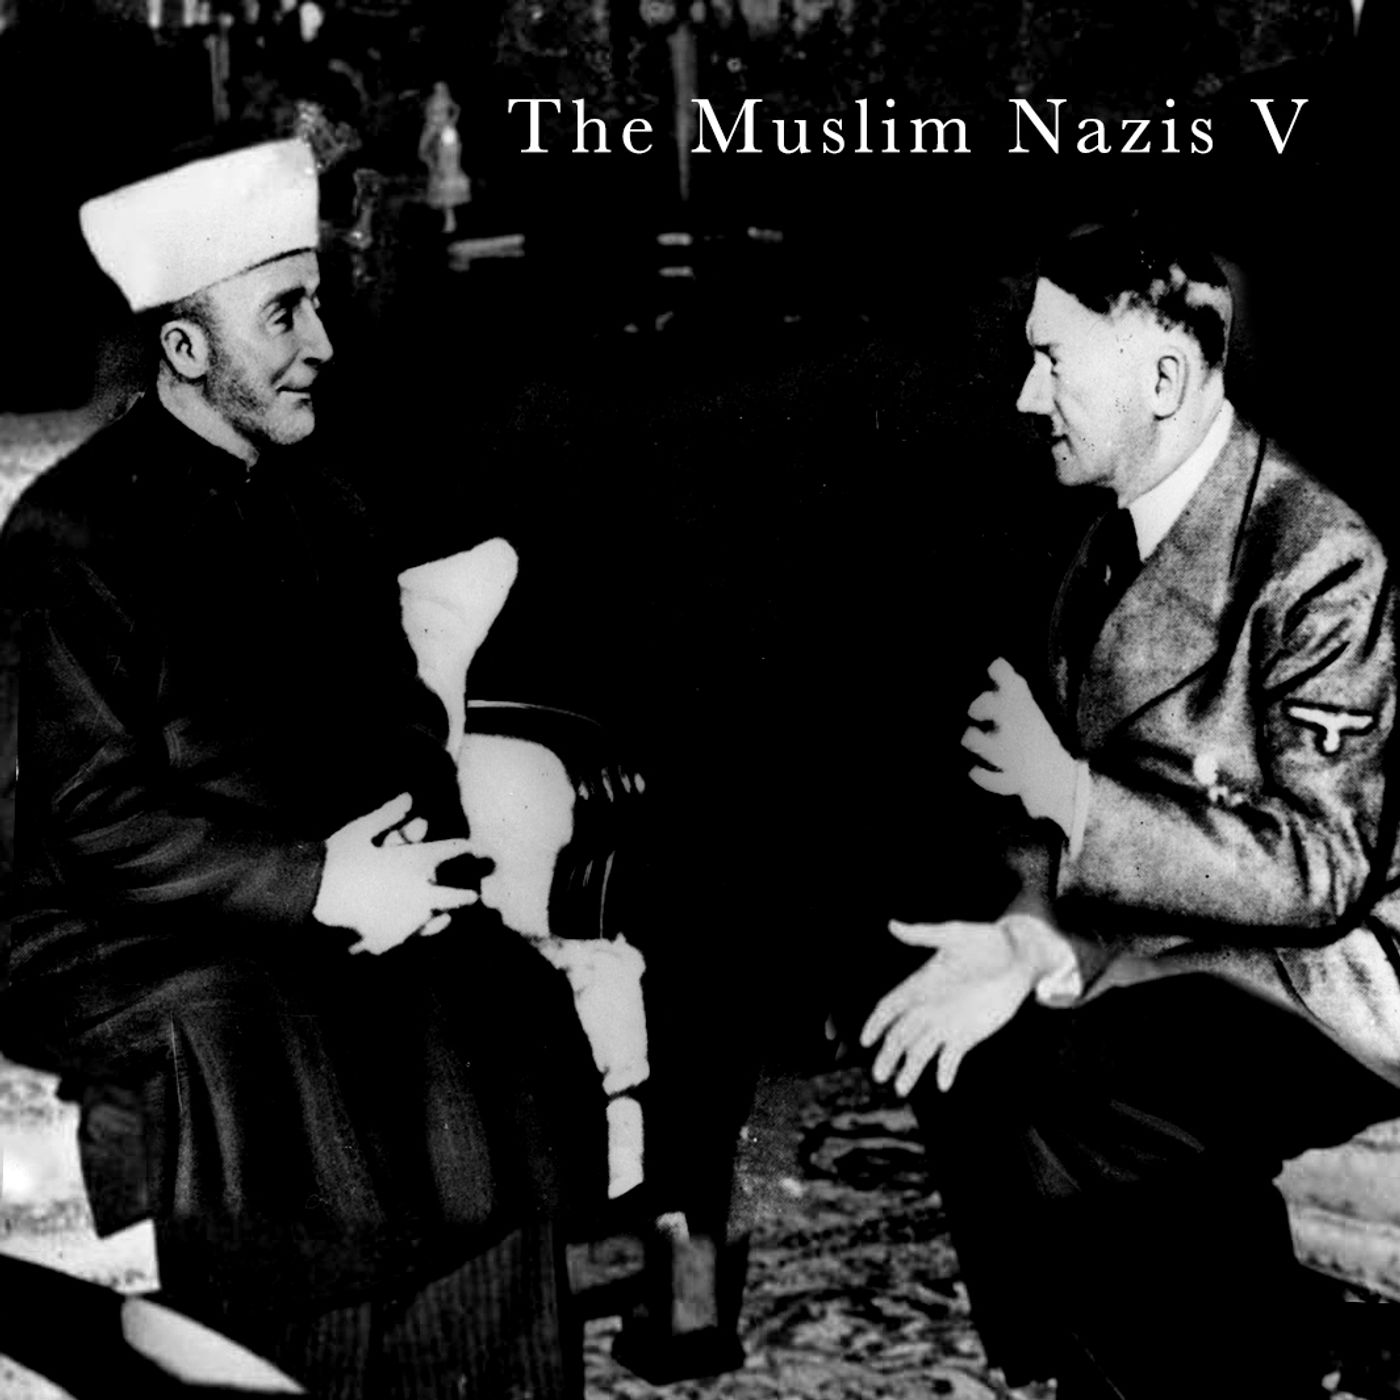 The Muslim Nazis V: Taking Hitler By The Hand